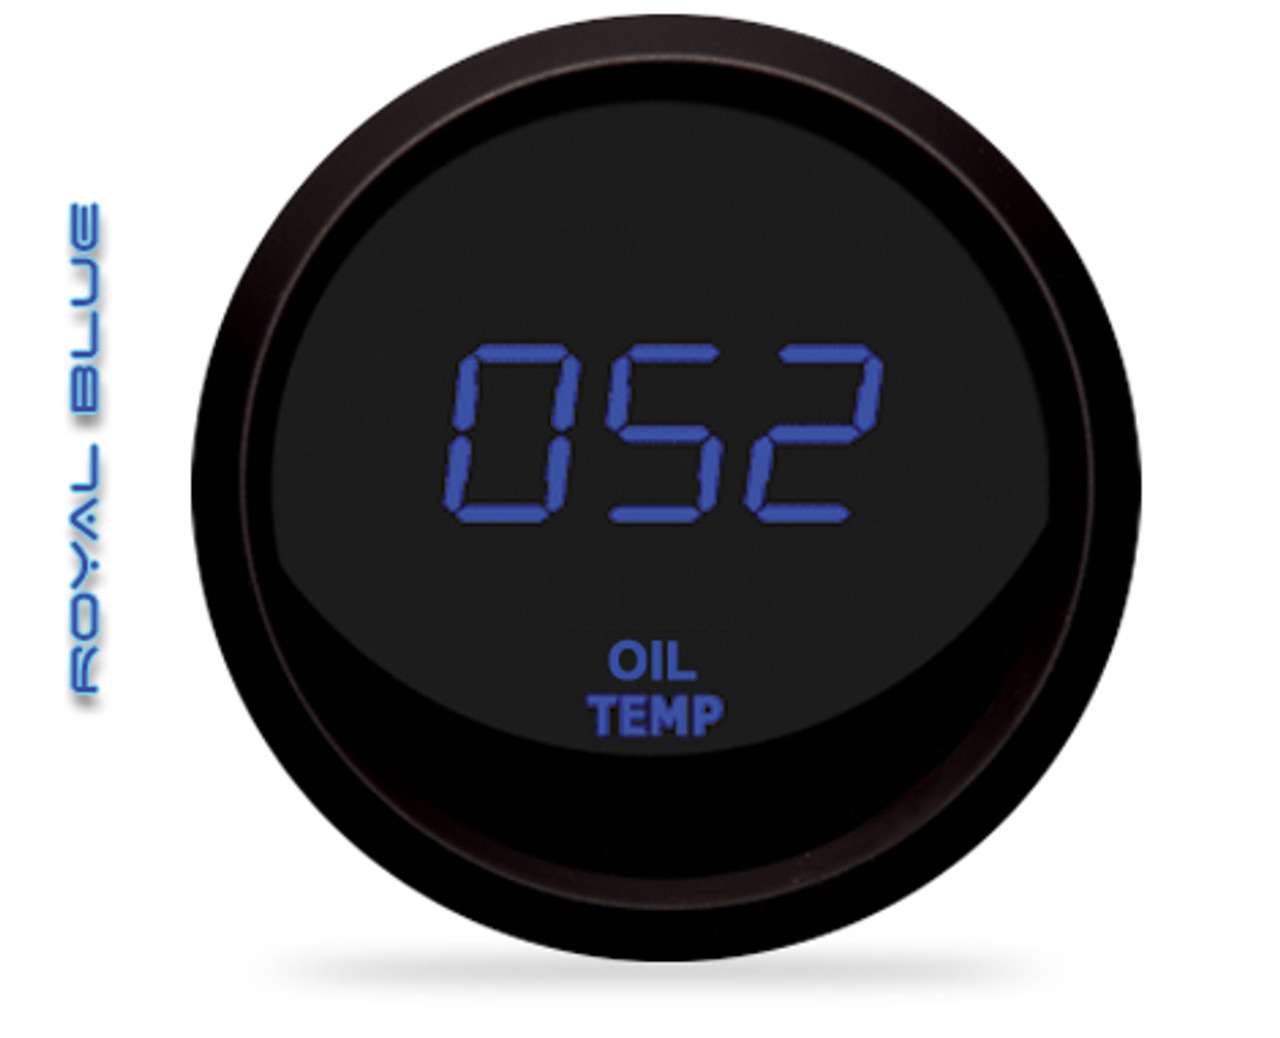 Oil Temperature LED Digital Black Bezel - M9108
The LED Digital Oil Temperature gauge is microprocessor-controlled and has a 50-250 degrees Fahrenheit range of accuracy! Intellitronix Oil Temperature gauge has precision accuracy, super bright LED lights, and electronic intelligence all in one.  